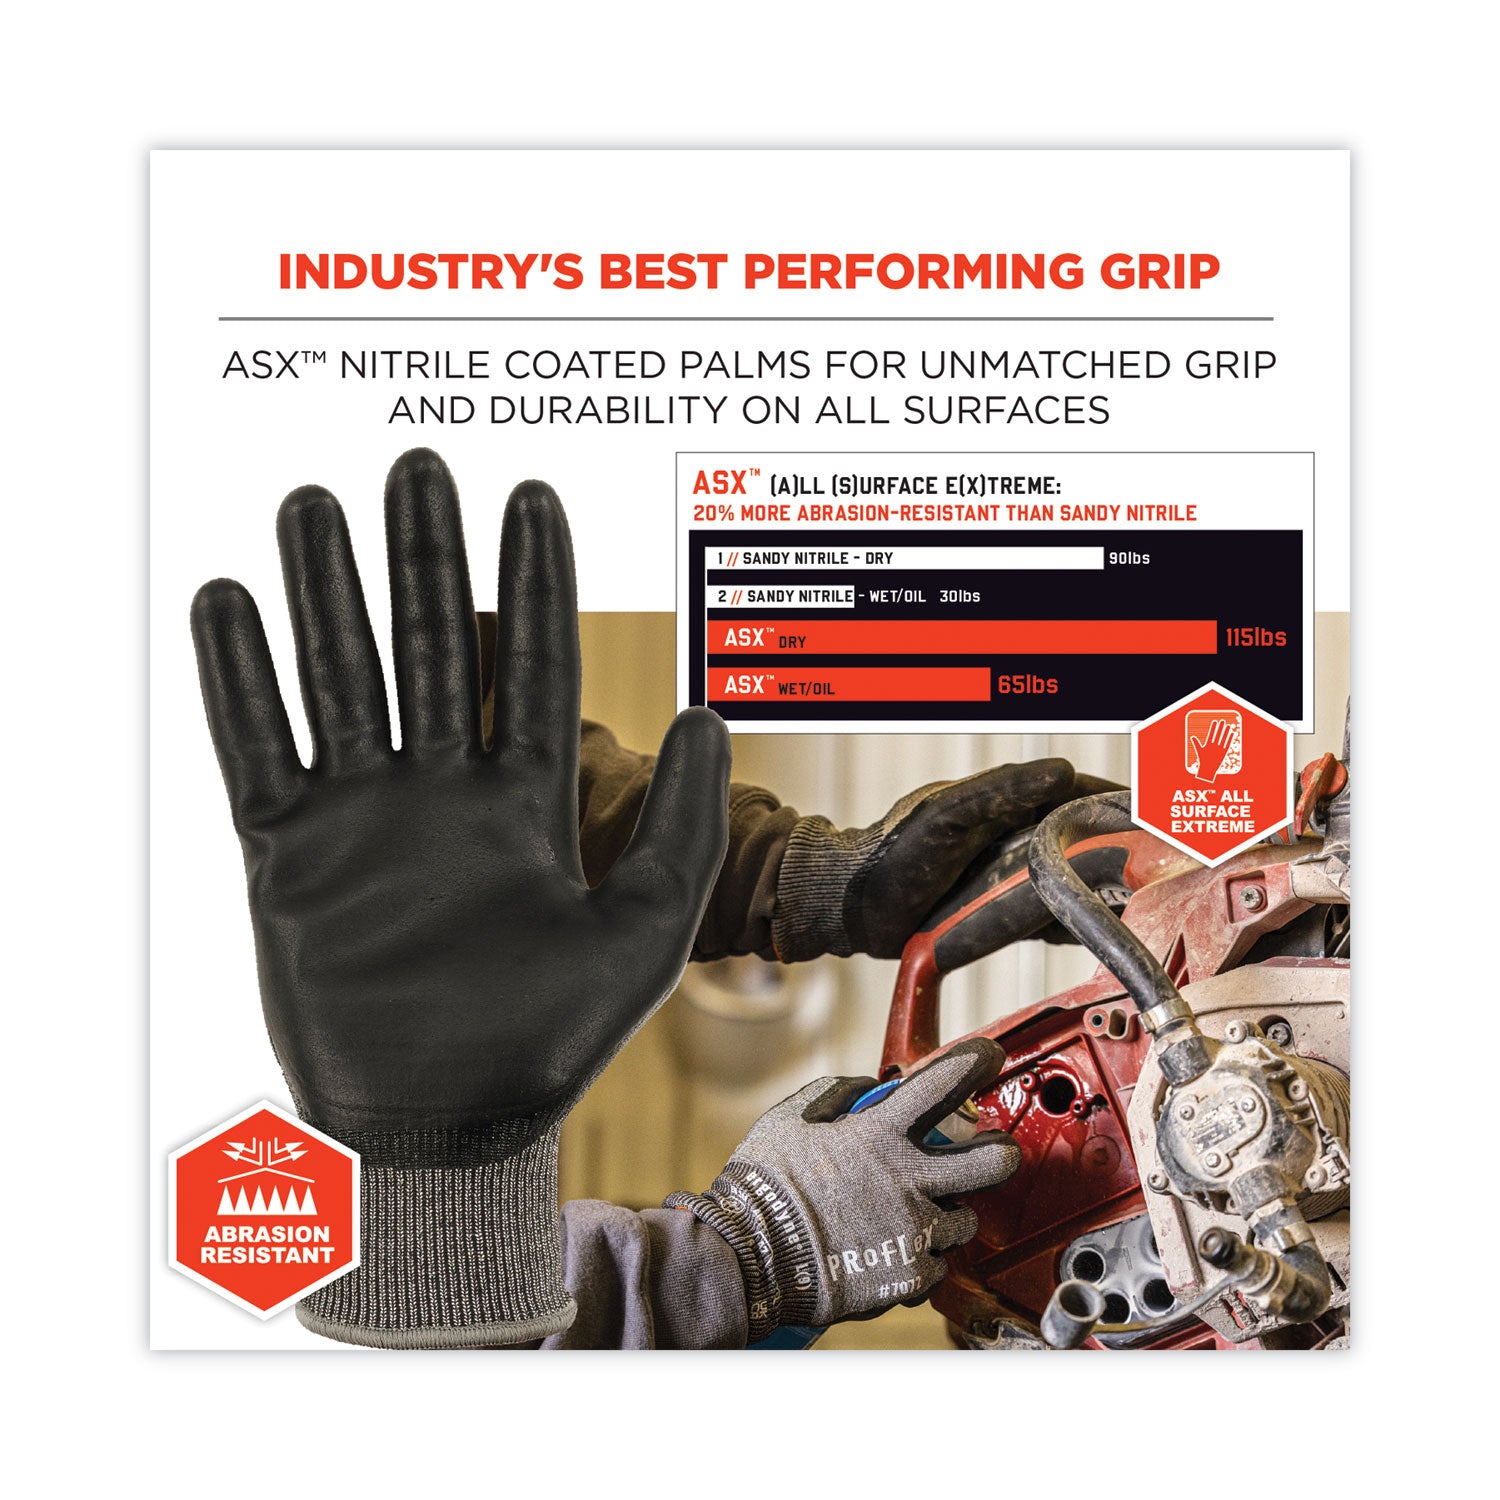 proflex-7072-ansi-a7-nitrile-coated-cr-gloves-gray-large-12-pairs-pack-ships-in-1-3-business-days_ego10304 - 6